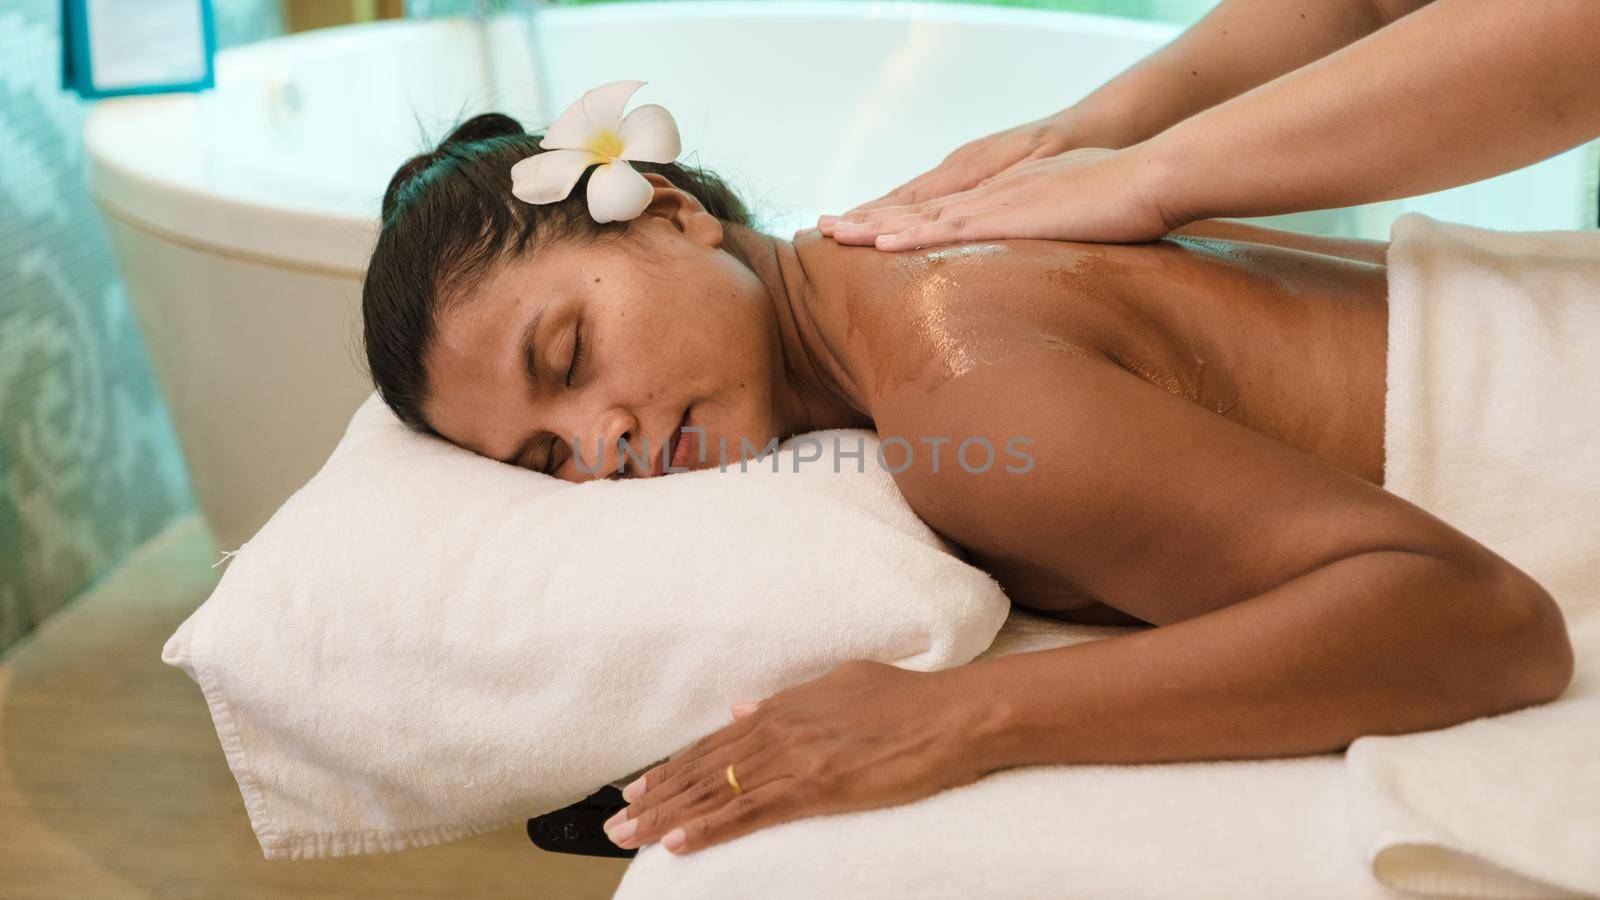 Asian women on a massage table, Asian woman getting a Thai massage at a luxury hotel in Thailand by fokkebok